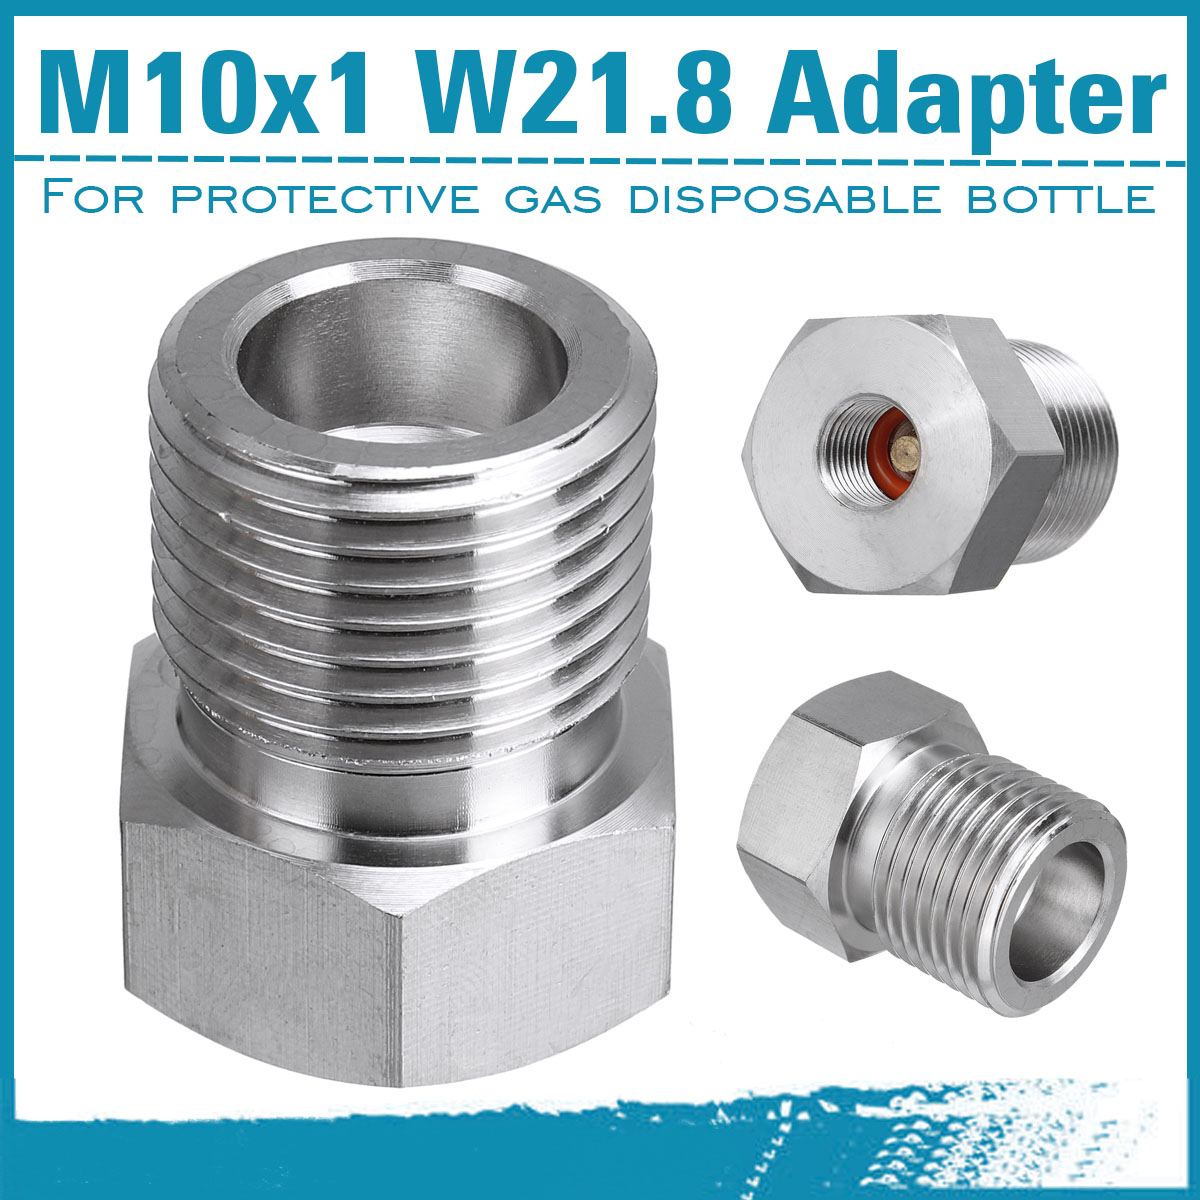 CO2-Adapter-For-Pressure-Reducer-From-Reusable-To-Disposable-Bottle-M10x1-Inert-Gas-1617890-2